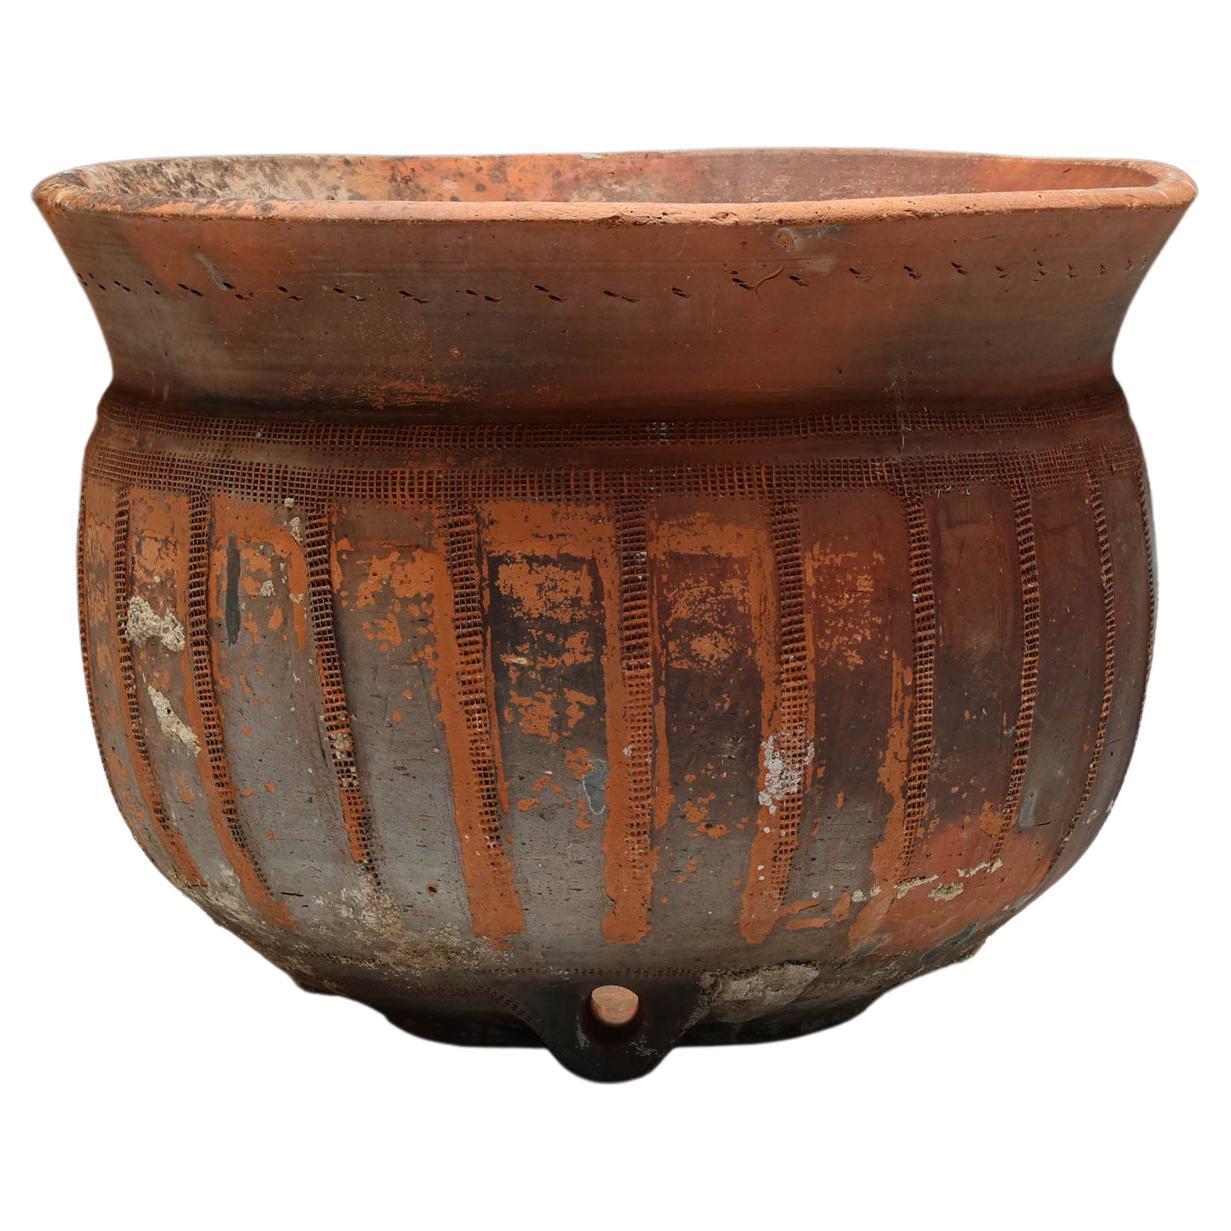 Ancient Hand-Crafted Portuguese Washbasin, Pot, Garden Elements, Rustic, 1940s For Sale